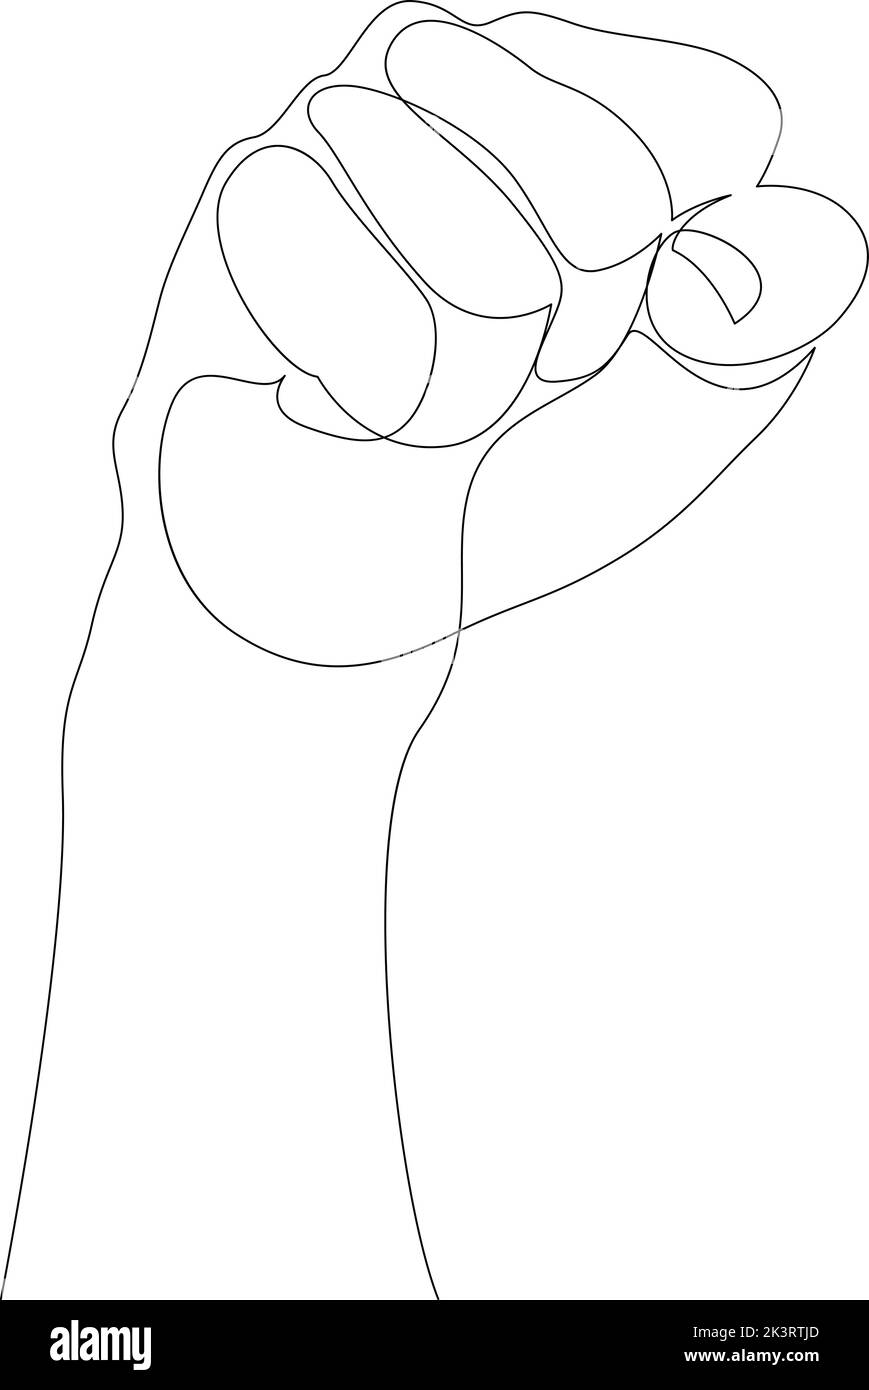 Continuous one line drawing of fist hand. Vector illustration Stock Vector